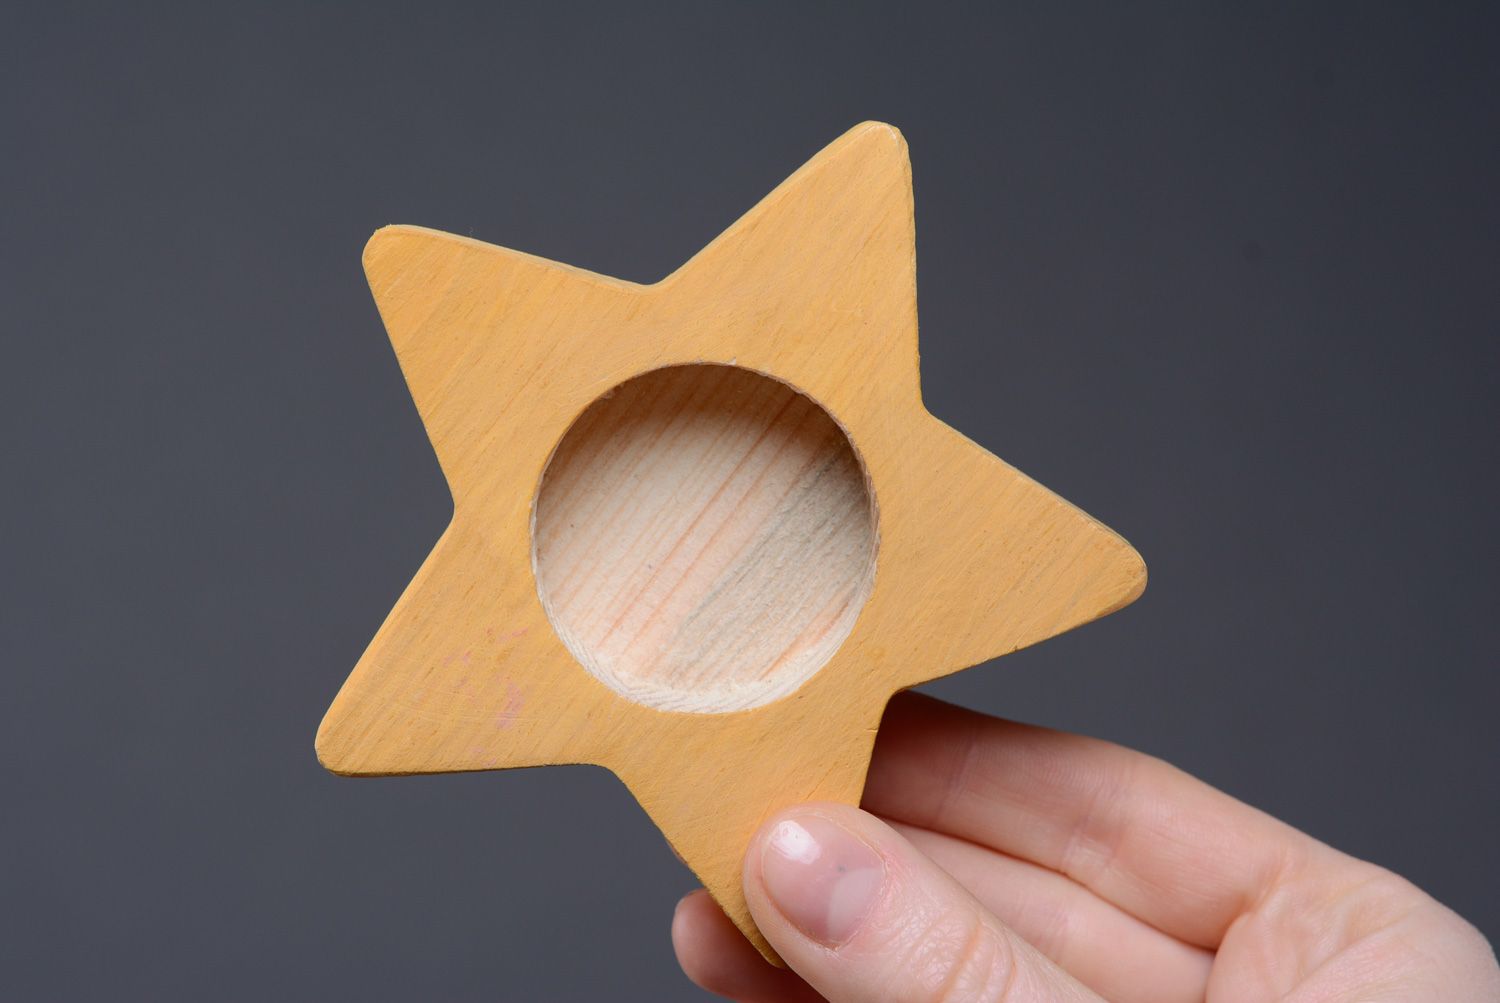 Yellow wooden candlestick in the shape of star photo 4